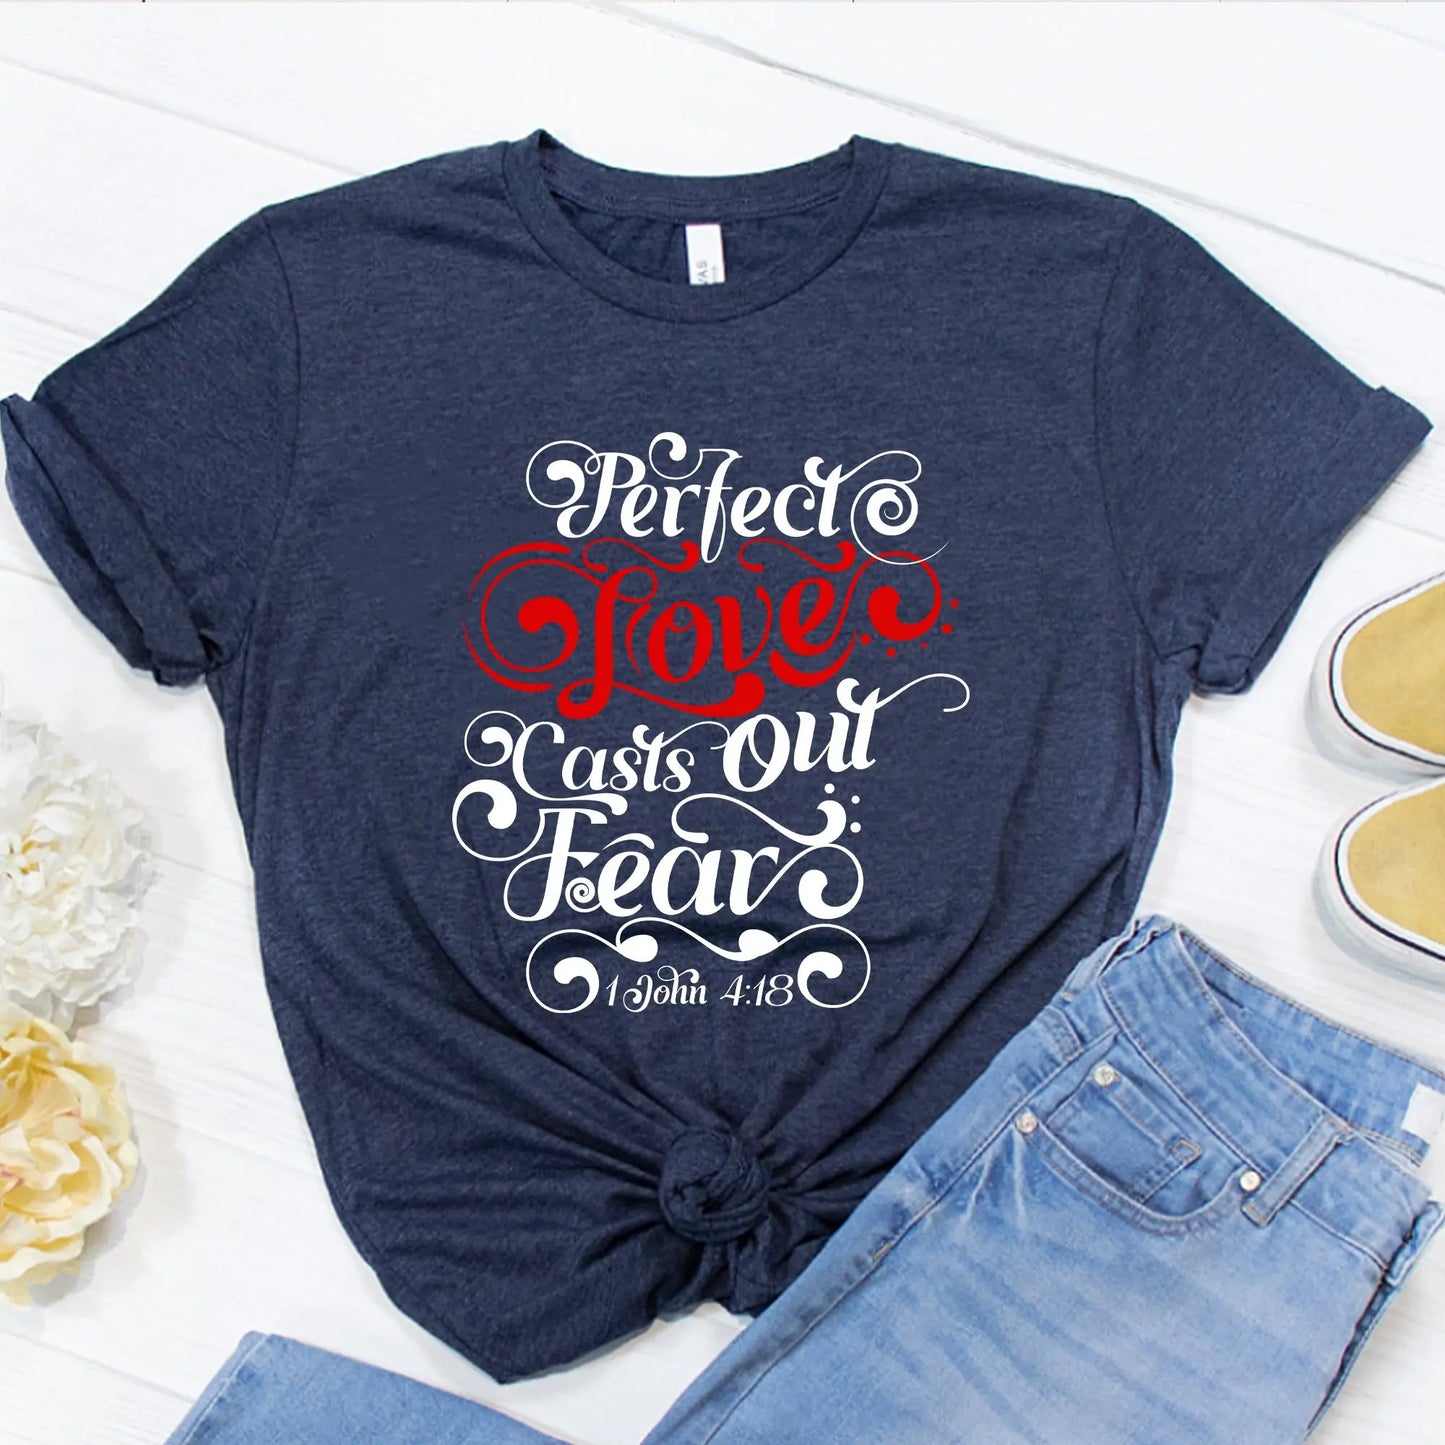 Perfect Love Casts Out All Fear Unisex t-shirt | 1 John 4:18 Amazing Faith Designs